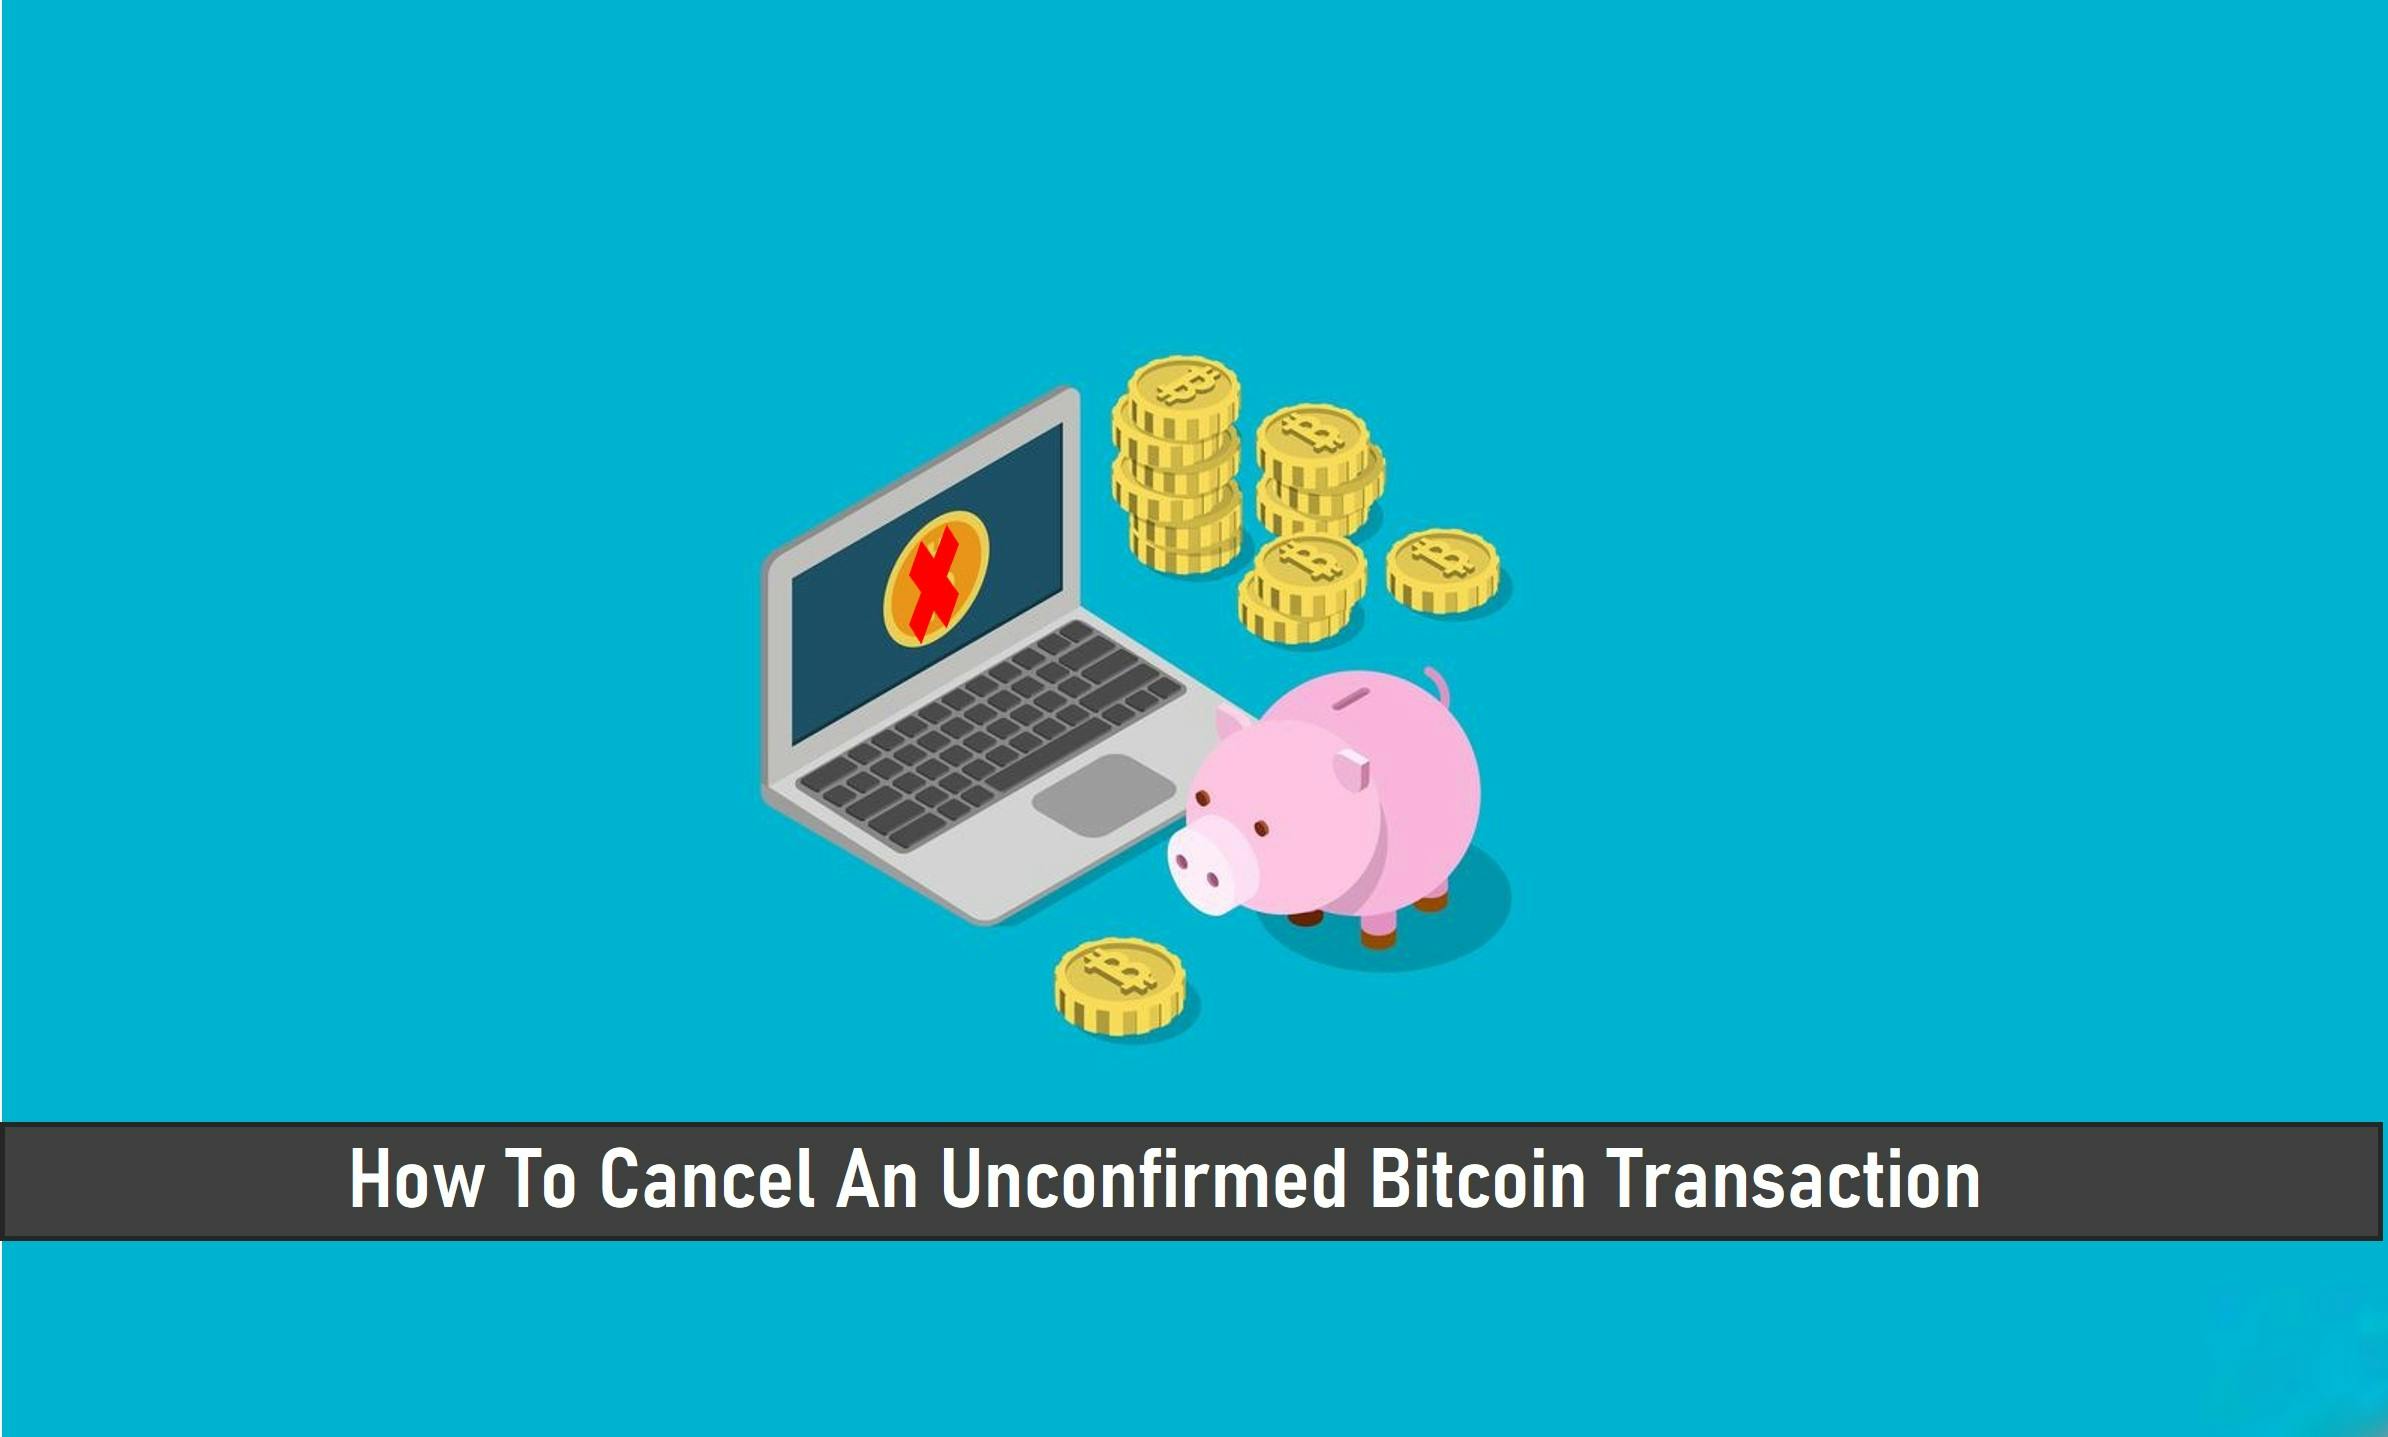 How To Cancel An Unconfirmed Bitcoin Transaction